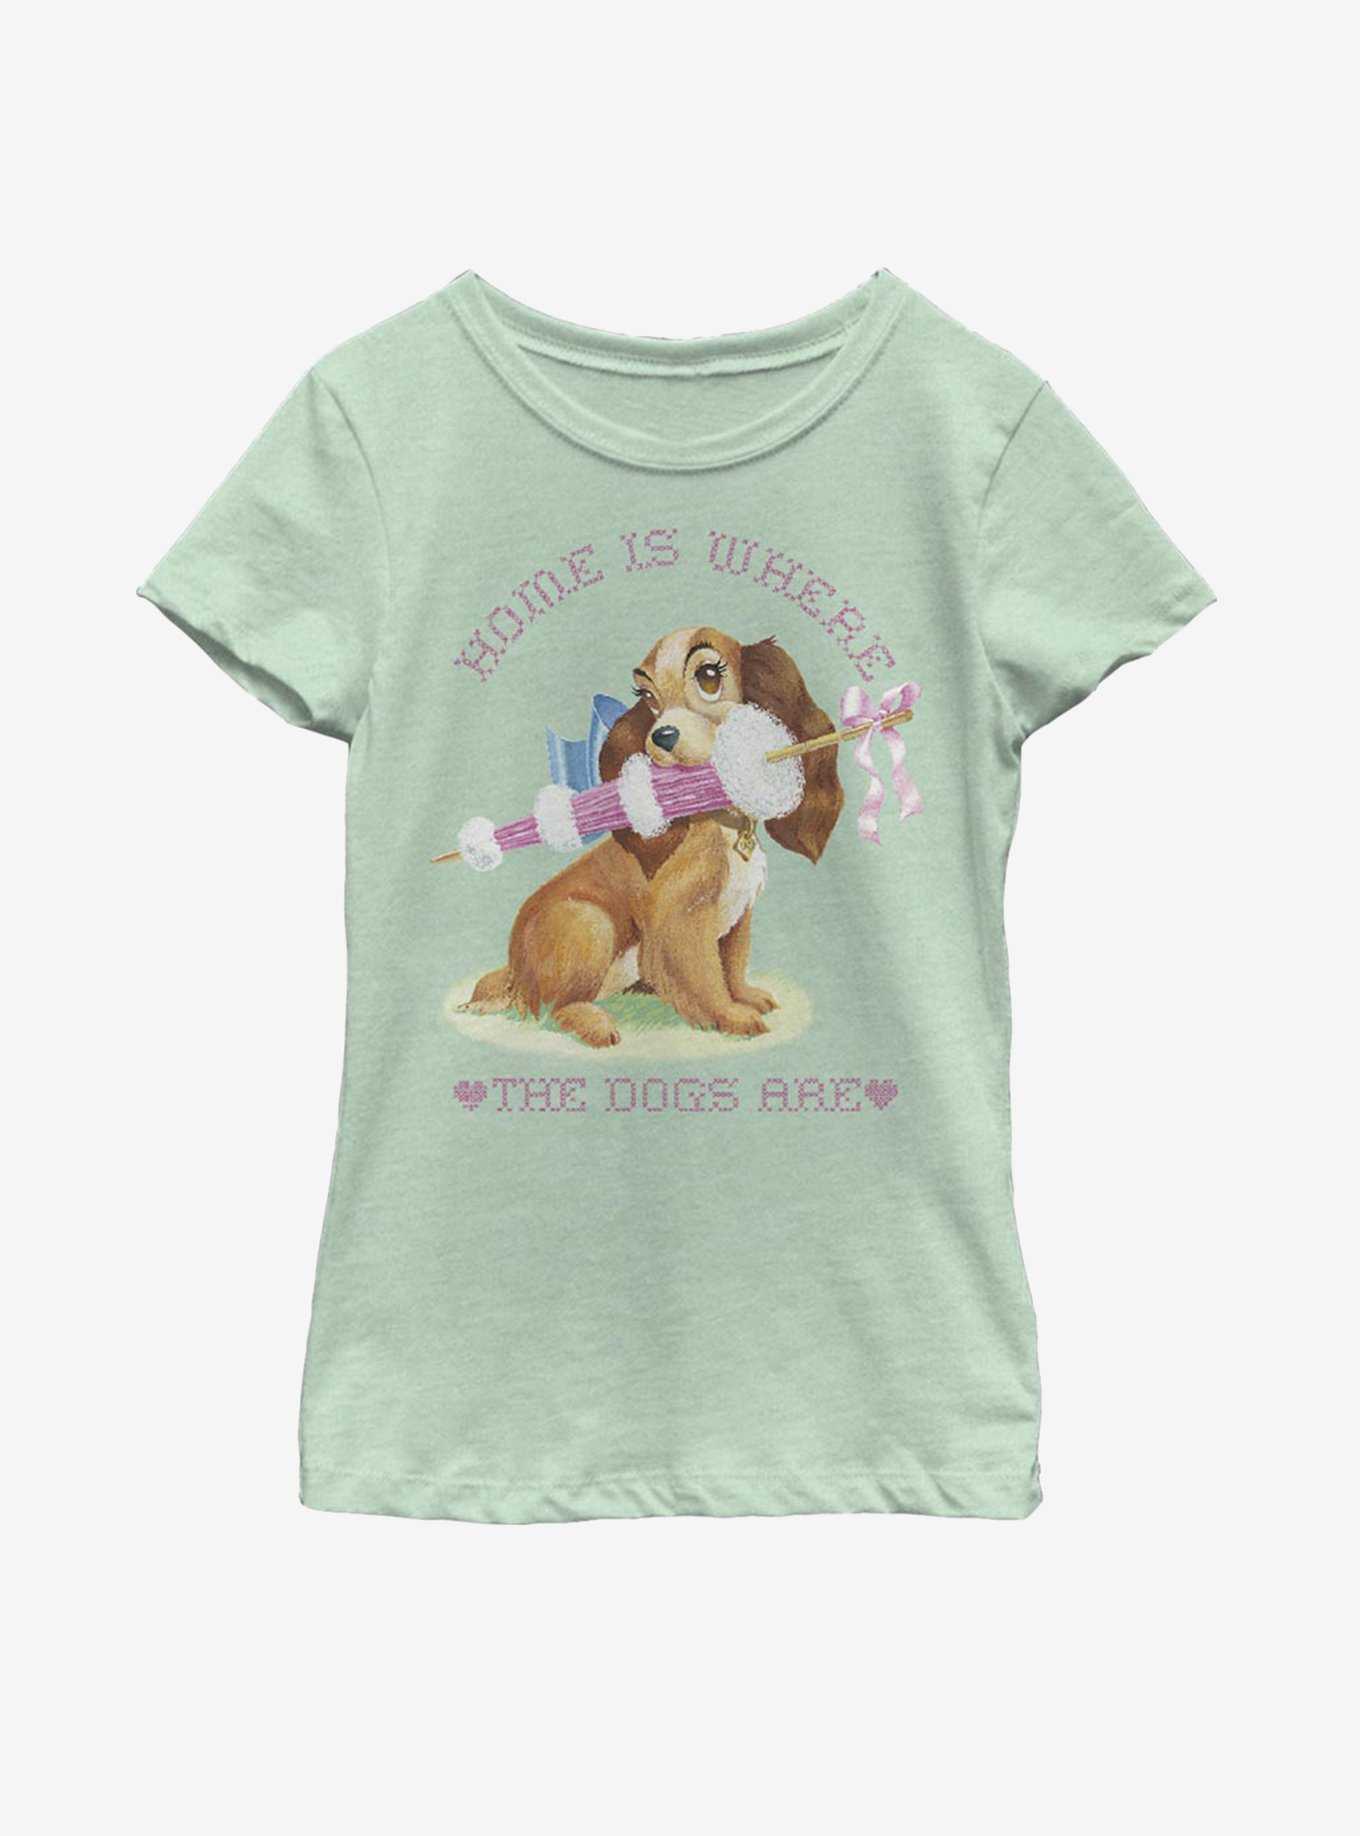 Disney Lady And The Tramp Lady Where The Dogs Are Youth Girls T-Shirt, , hi-res